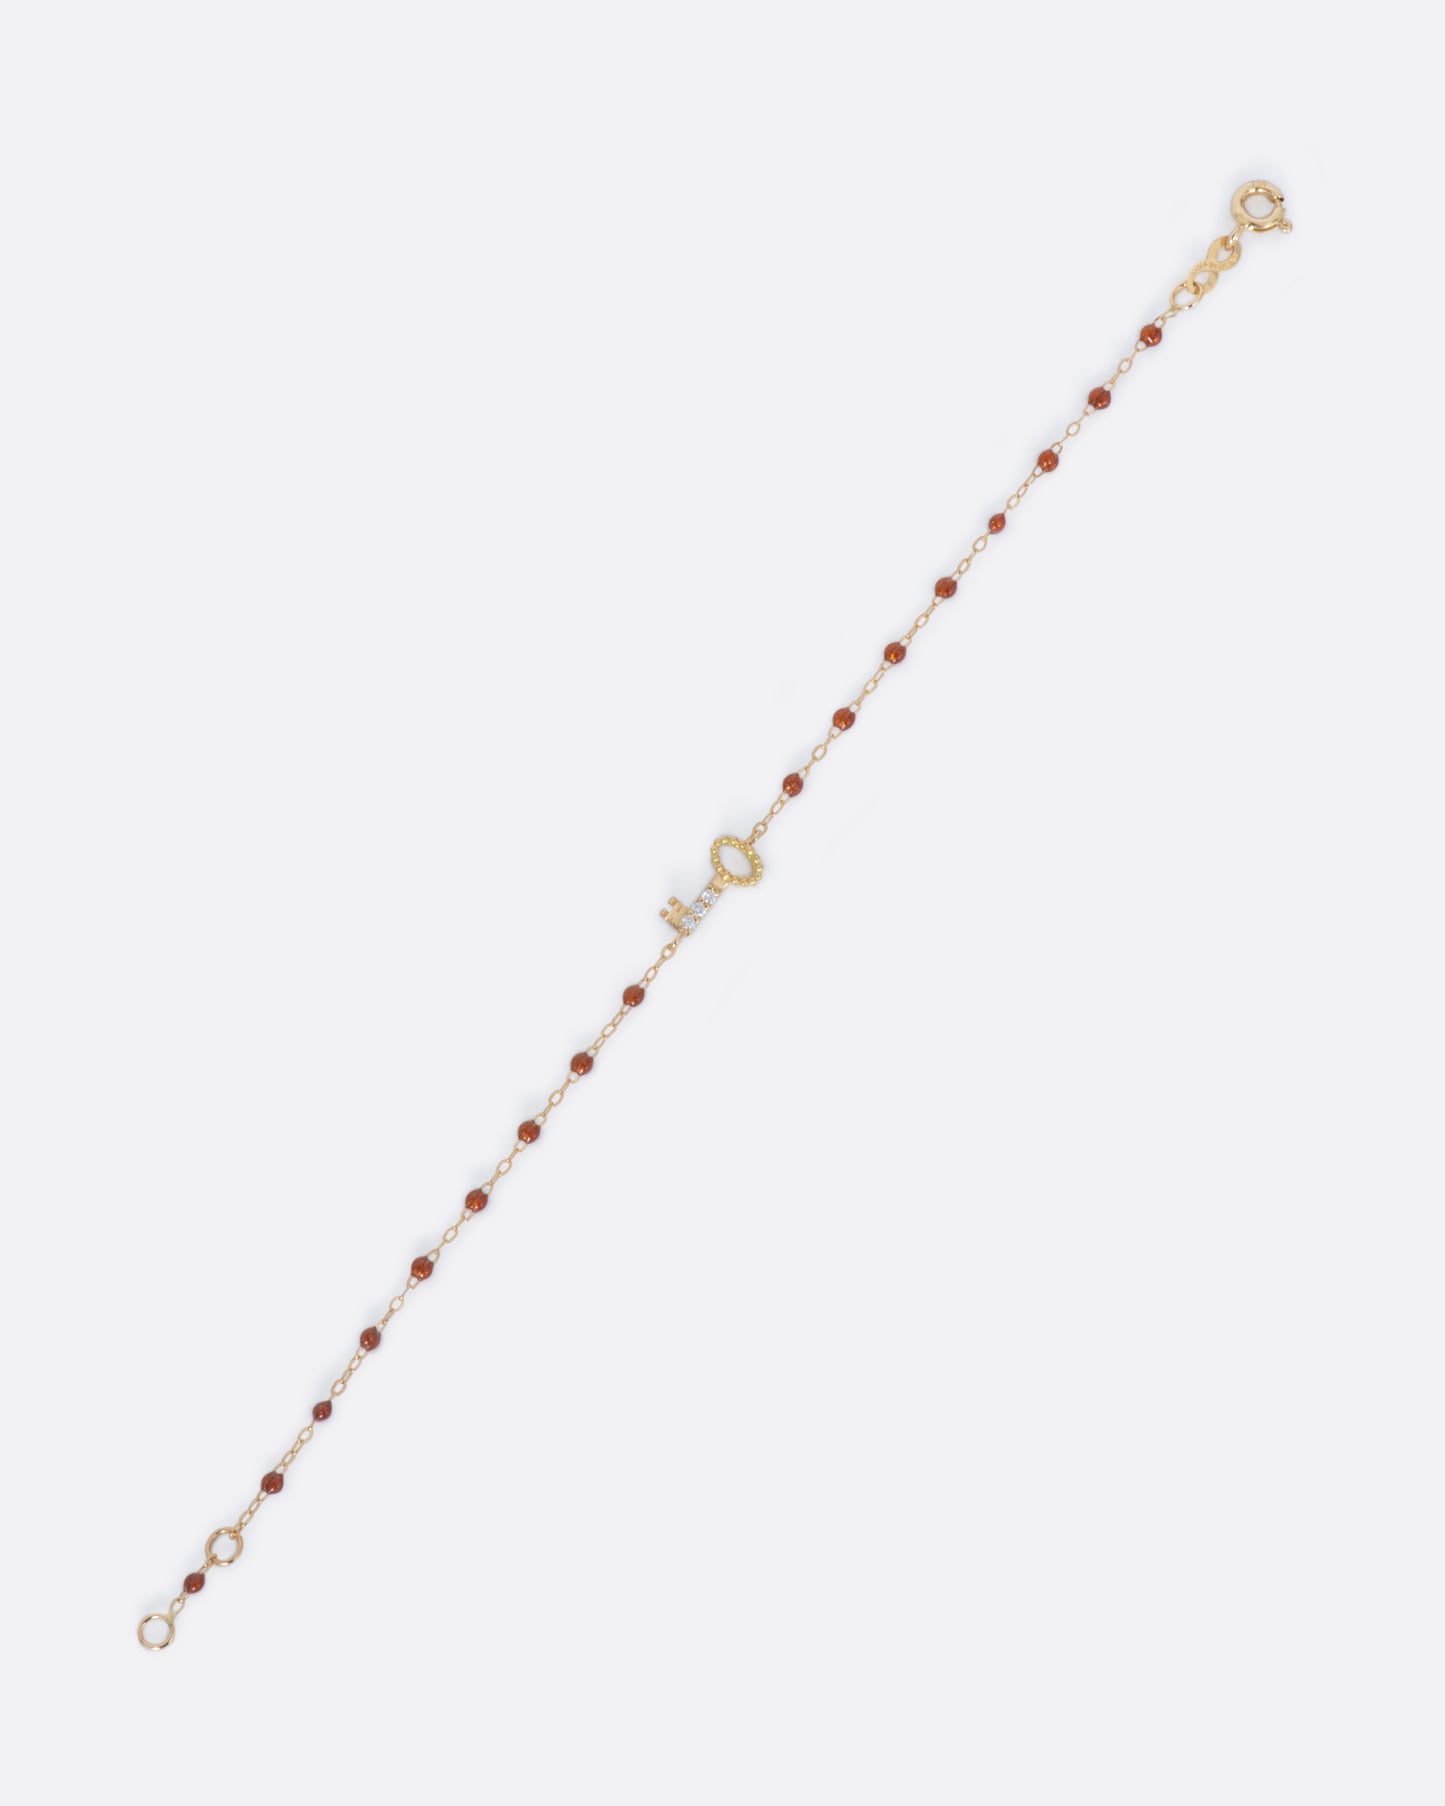 A yellow gold chain bracelet with copper resin drops and a key, lined in diamonds.